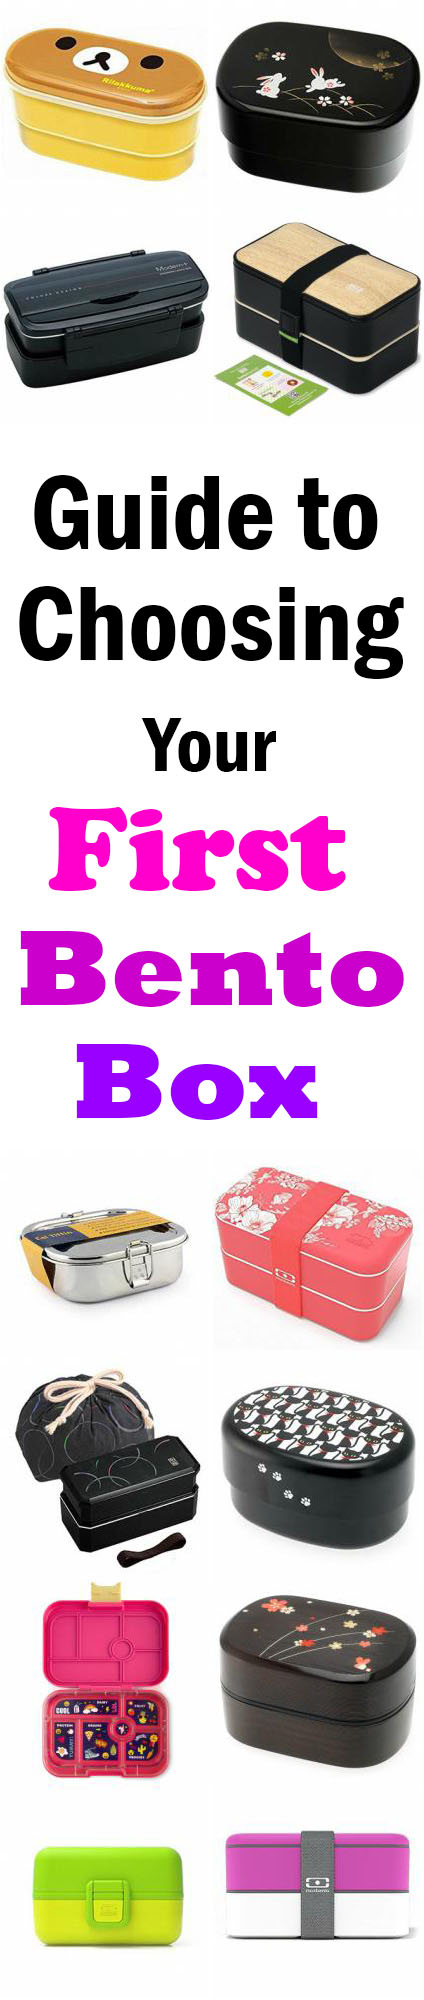 With over 12 different bento boxes to choose from, this is THE ultimate guide to choosing your very first bento box! Guaranteed to have the perfect match for your specific needs, no matter your age or gender. A great selection of traditional, modern, kid-friendly, low-maintenance, budget-friendly, and more! Get the full guide at loveatfirstbento.com